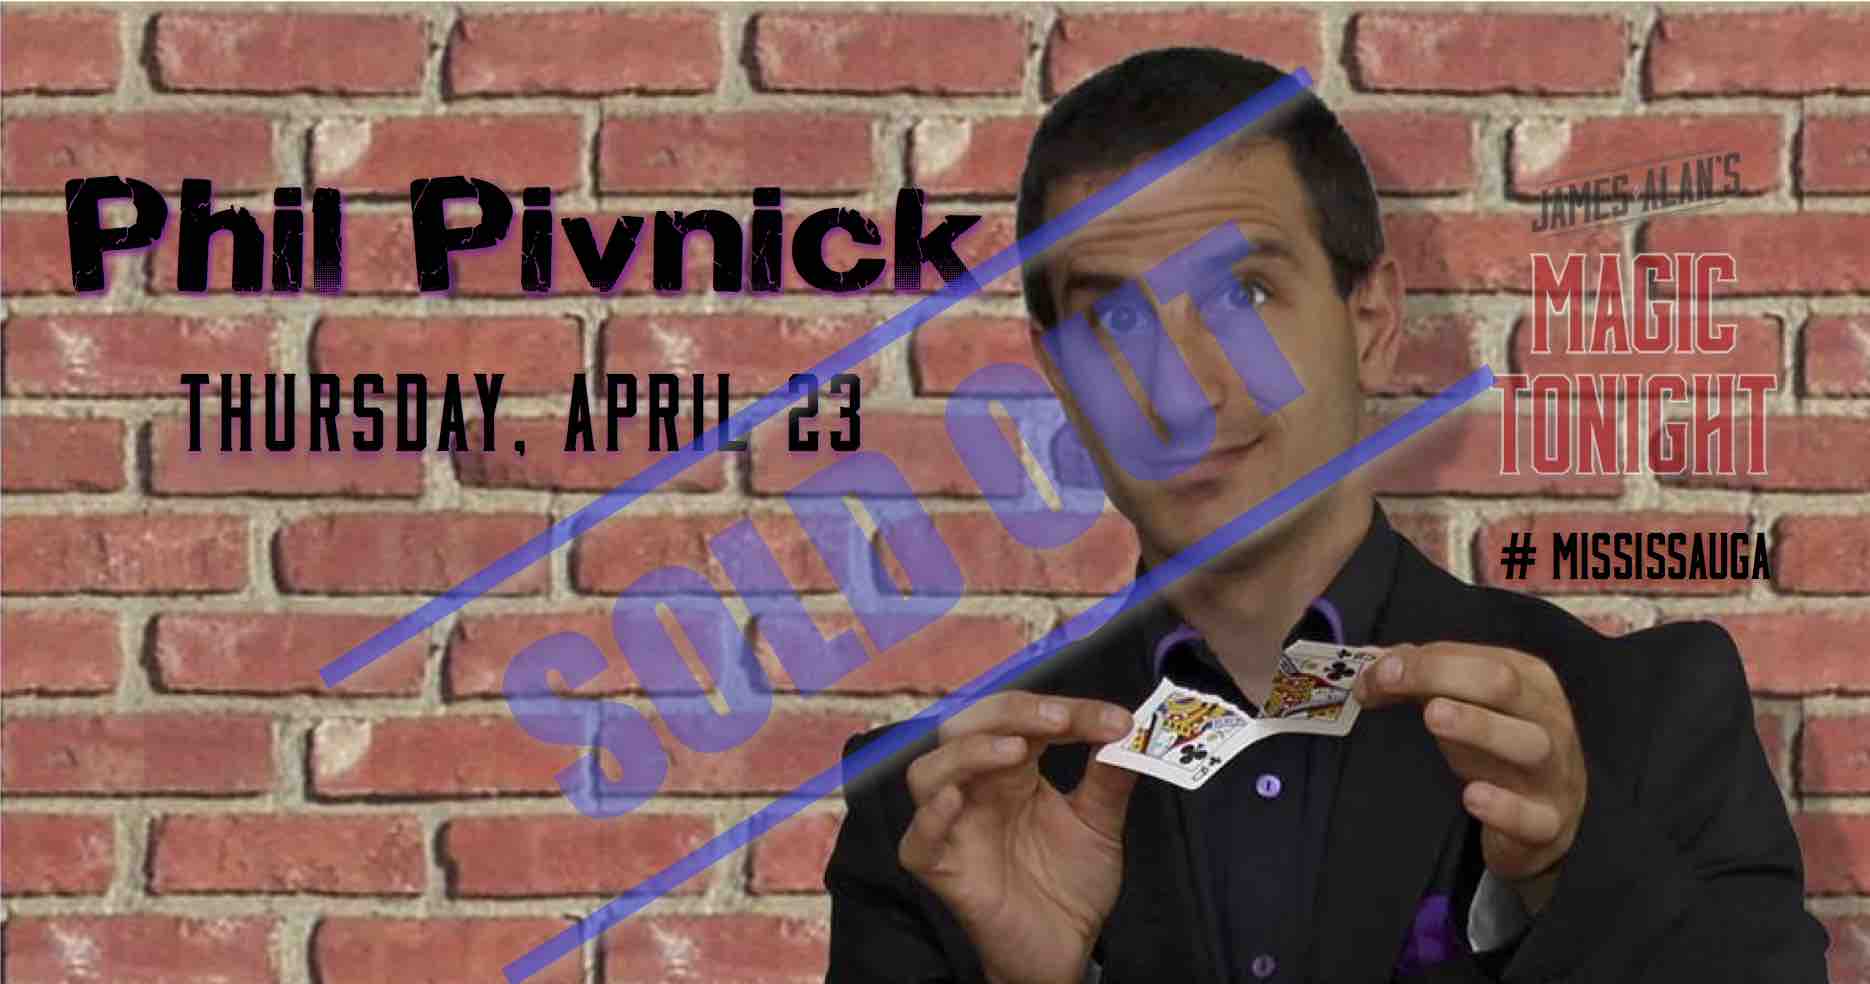 Apr 23 Phil Pivnick Sold out